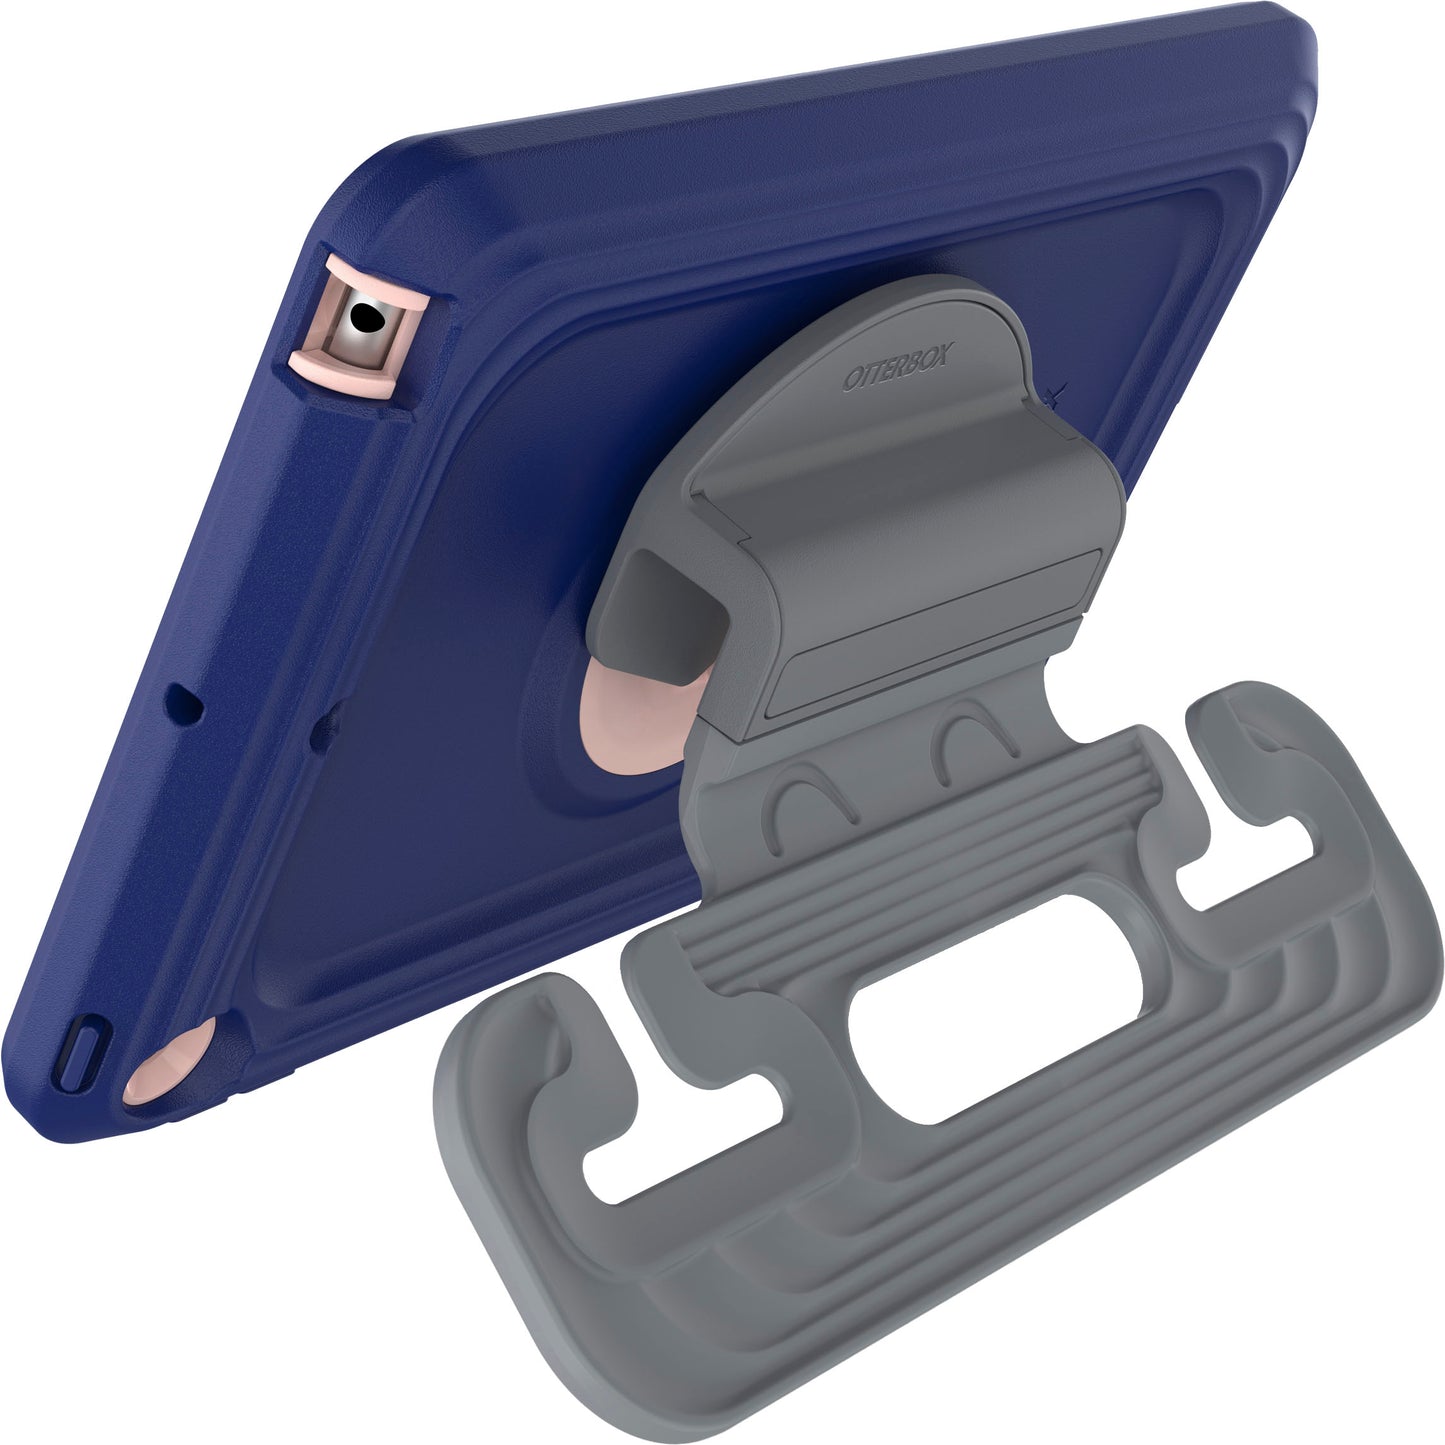 iPad mini 5th gen cover with blue back stand